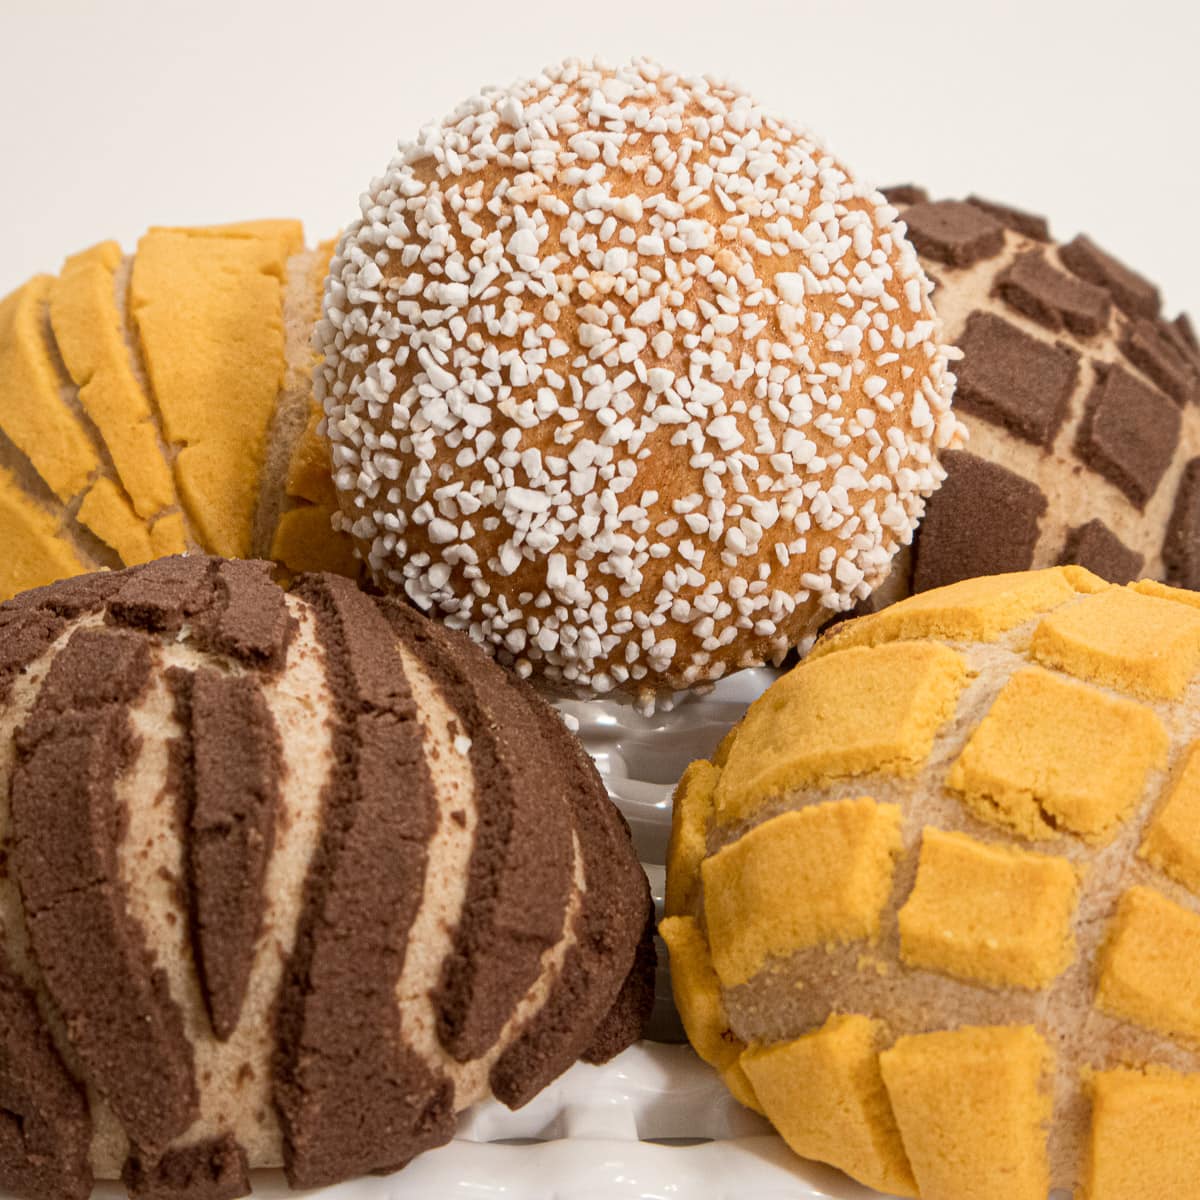 Five Mexican sweet rolls, Conchas with different toppings.